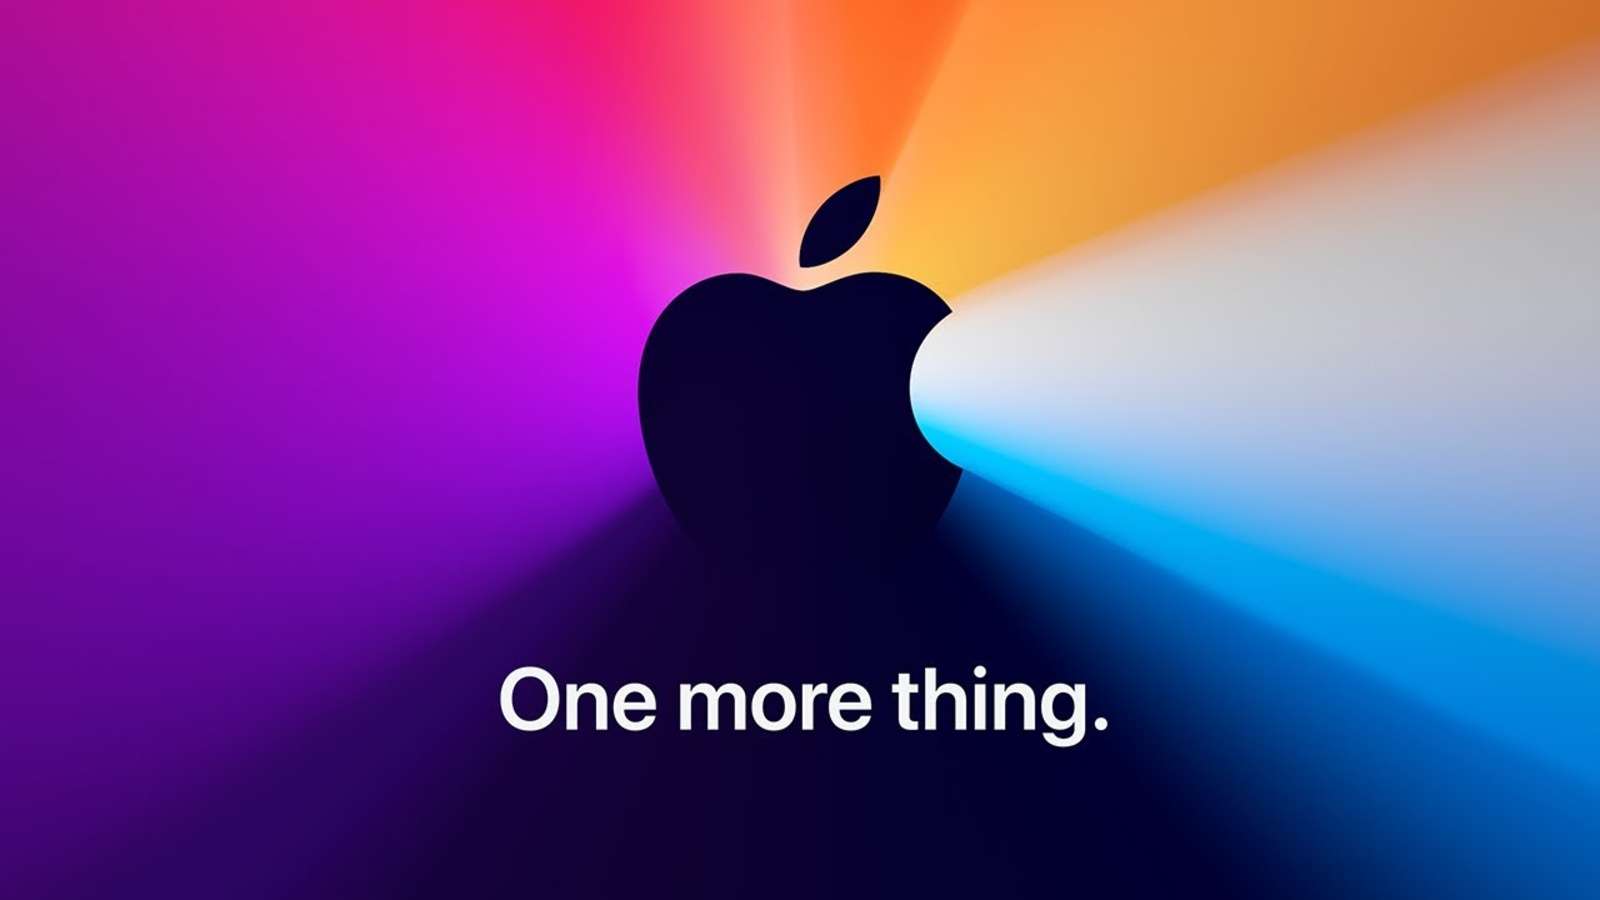 Apple One More Thing event November 10